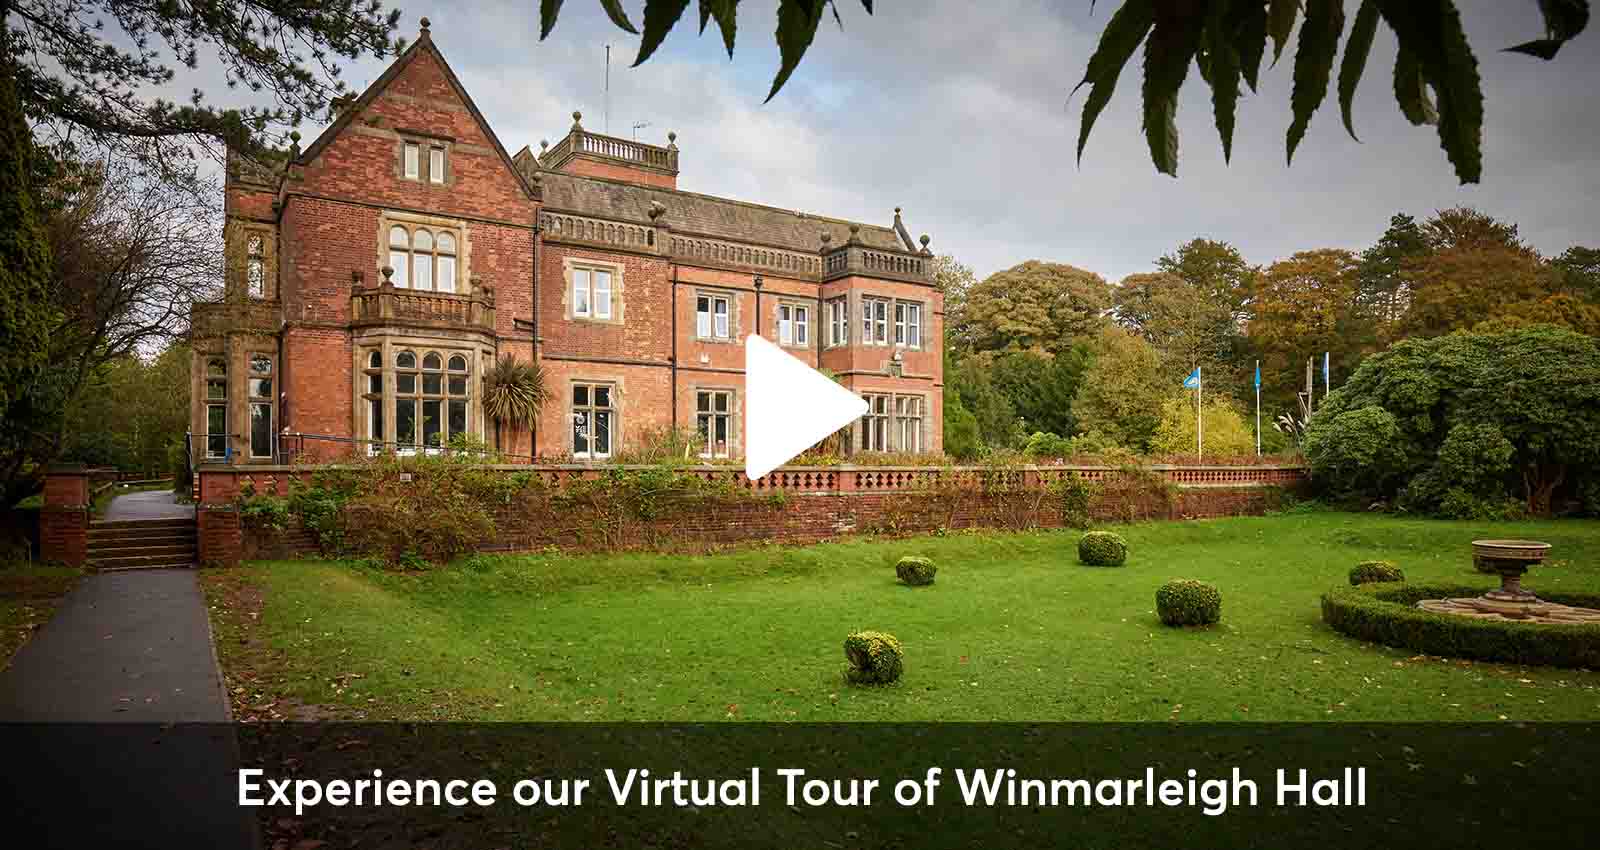 Primary School Trips to Winmarleigh Hall